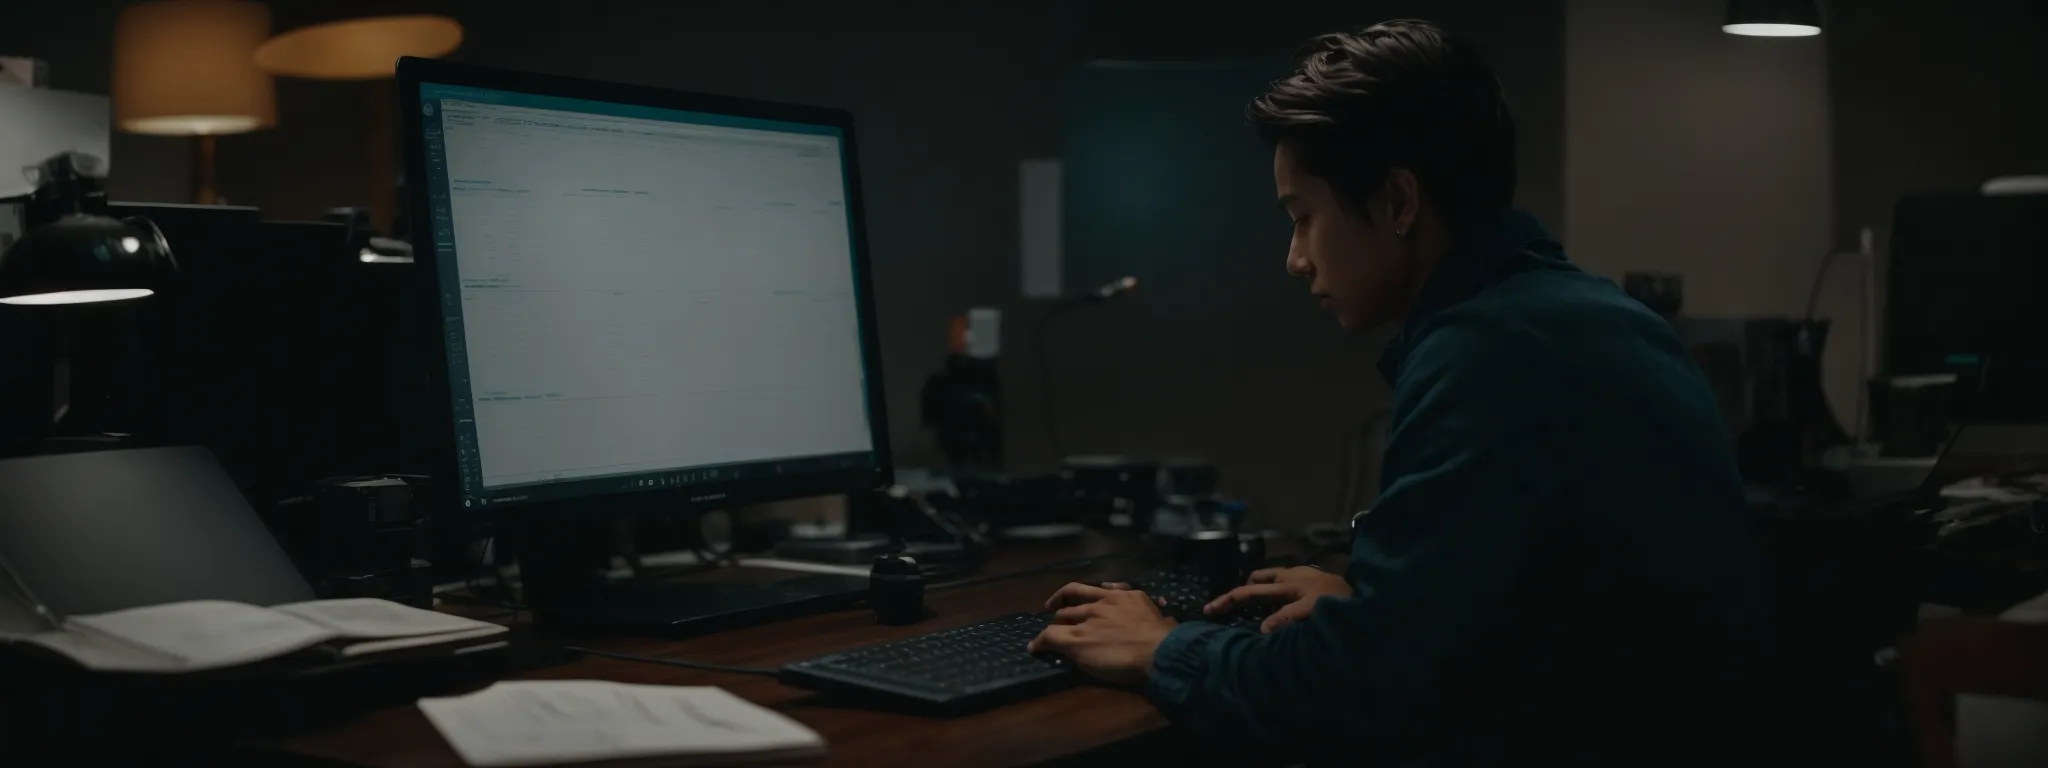 a person sits at a computer, deeply focused on analyzing charts and data on the screen.